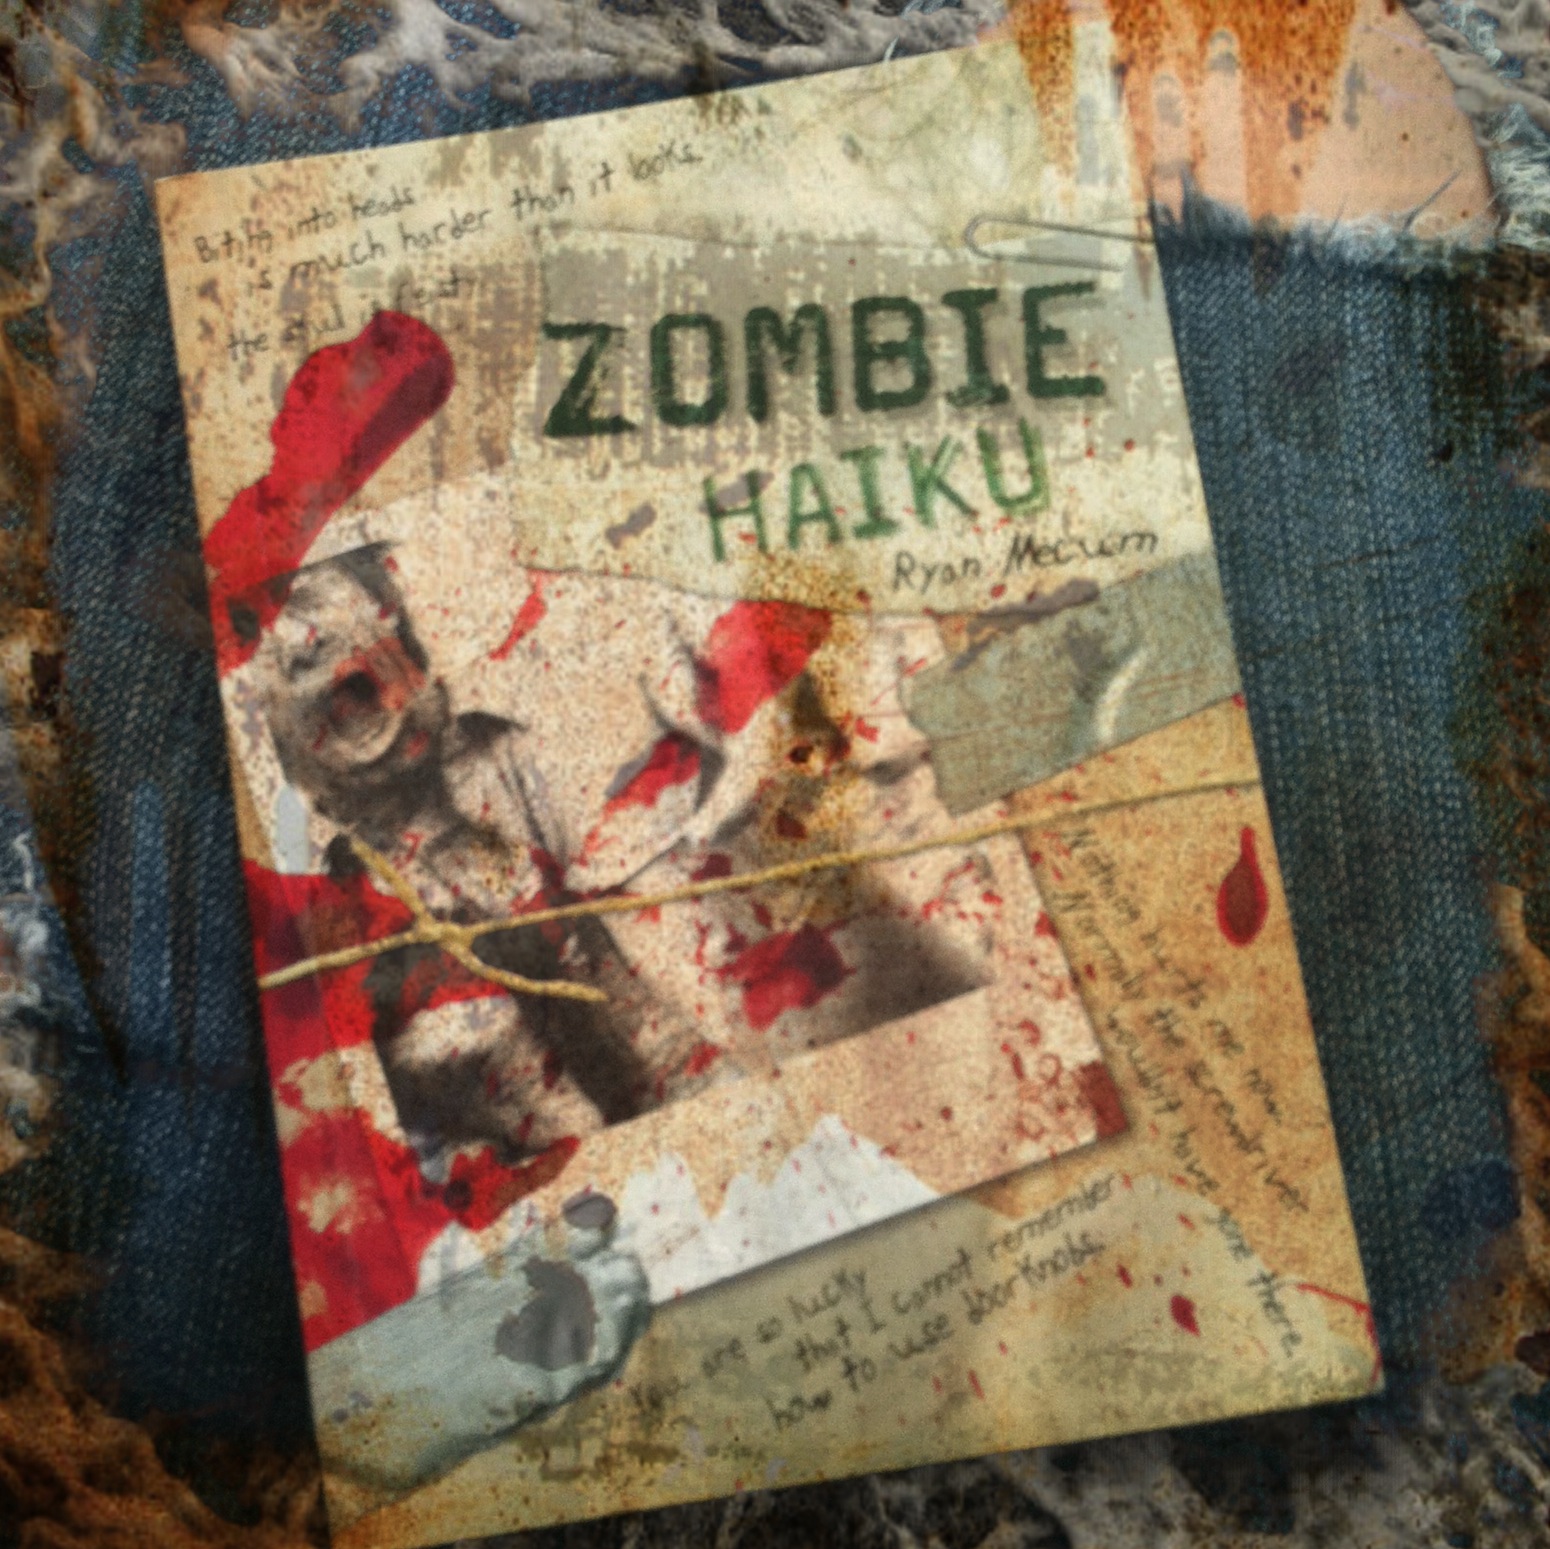 Zombie Haiku is the touching story of a zombie's gradual decay told through